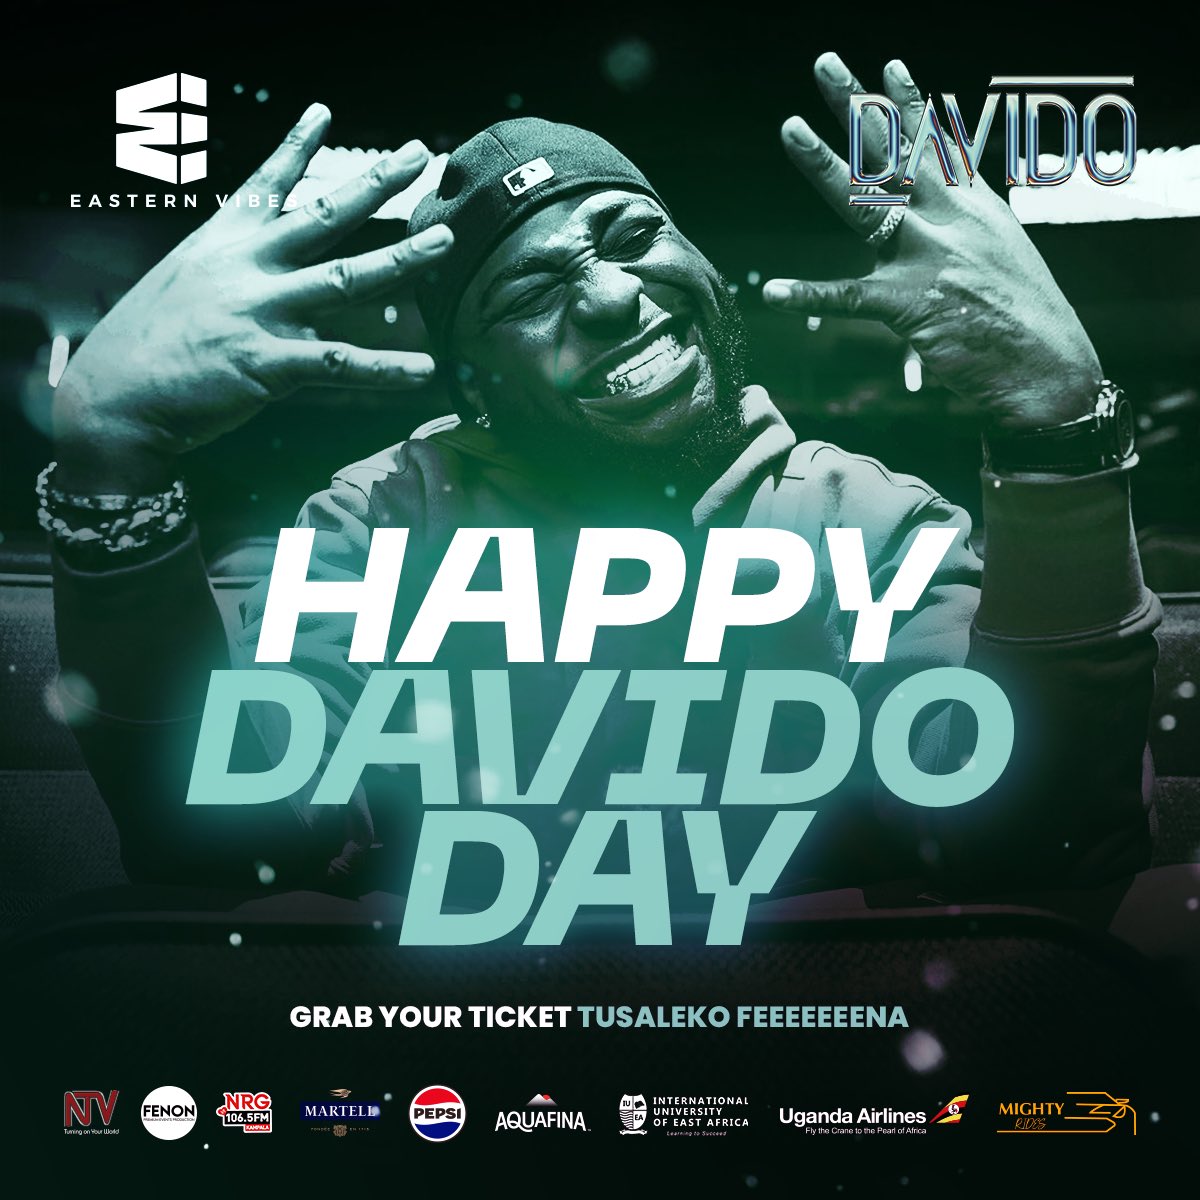 ⏳ The D-Day Is Here⏳ Happy Davido Day Uganda 🇺🇬 An electric timeless experience is upon us! Be sure to bring your dope vibes and dope energy coz that’s what @davido is bringing!!! #TimelessKampala #DavidoInUG